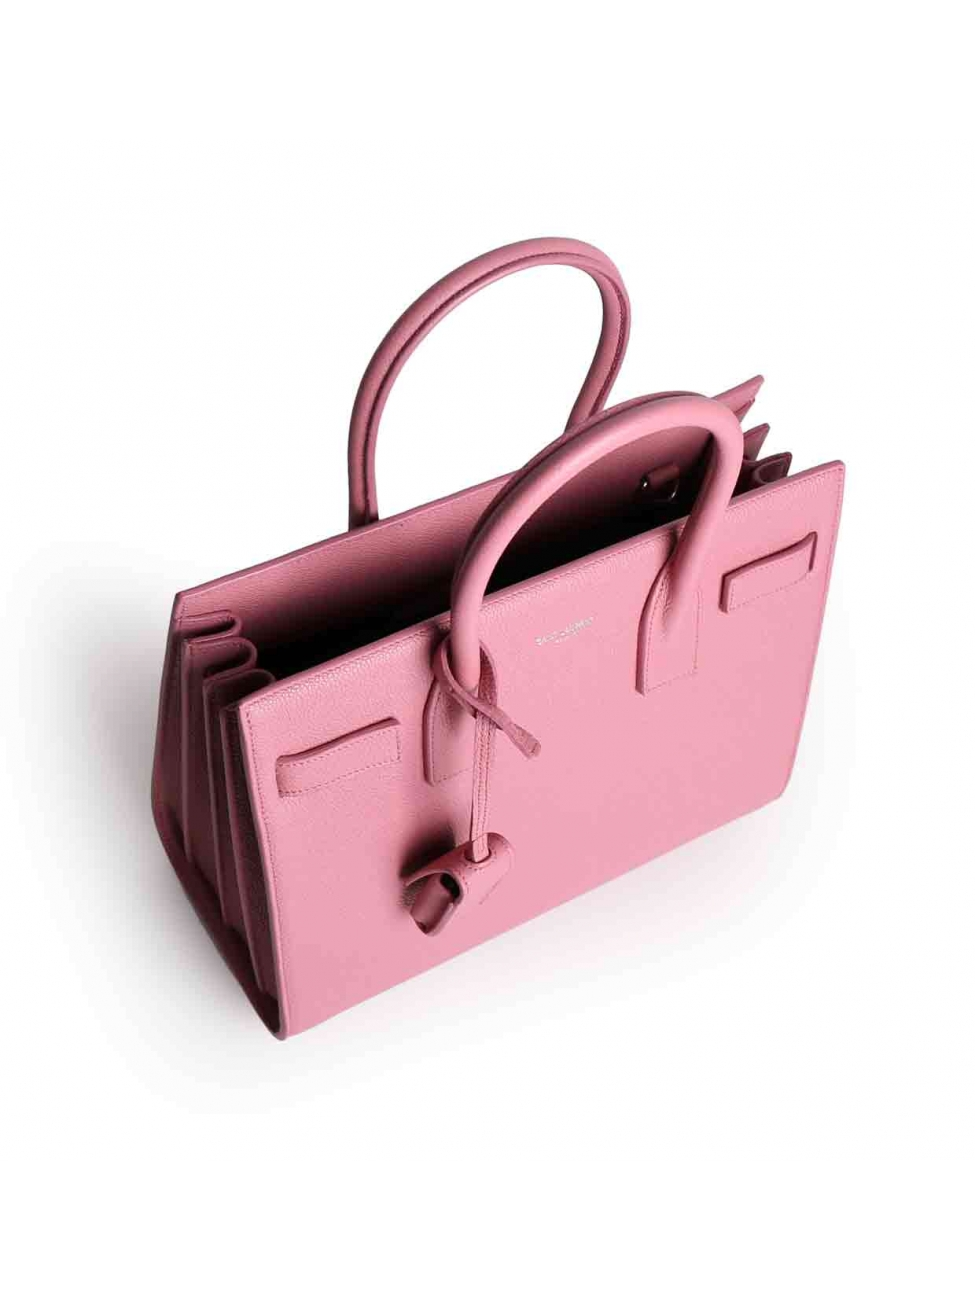 ysl classic monogram clutch - classic small sac de jour bag in old rose grained leather